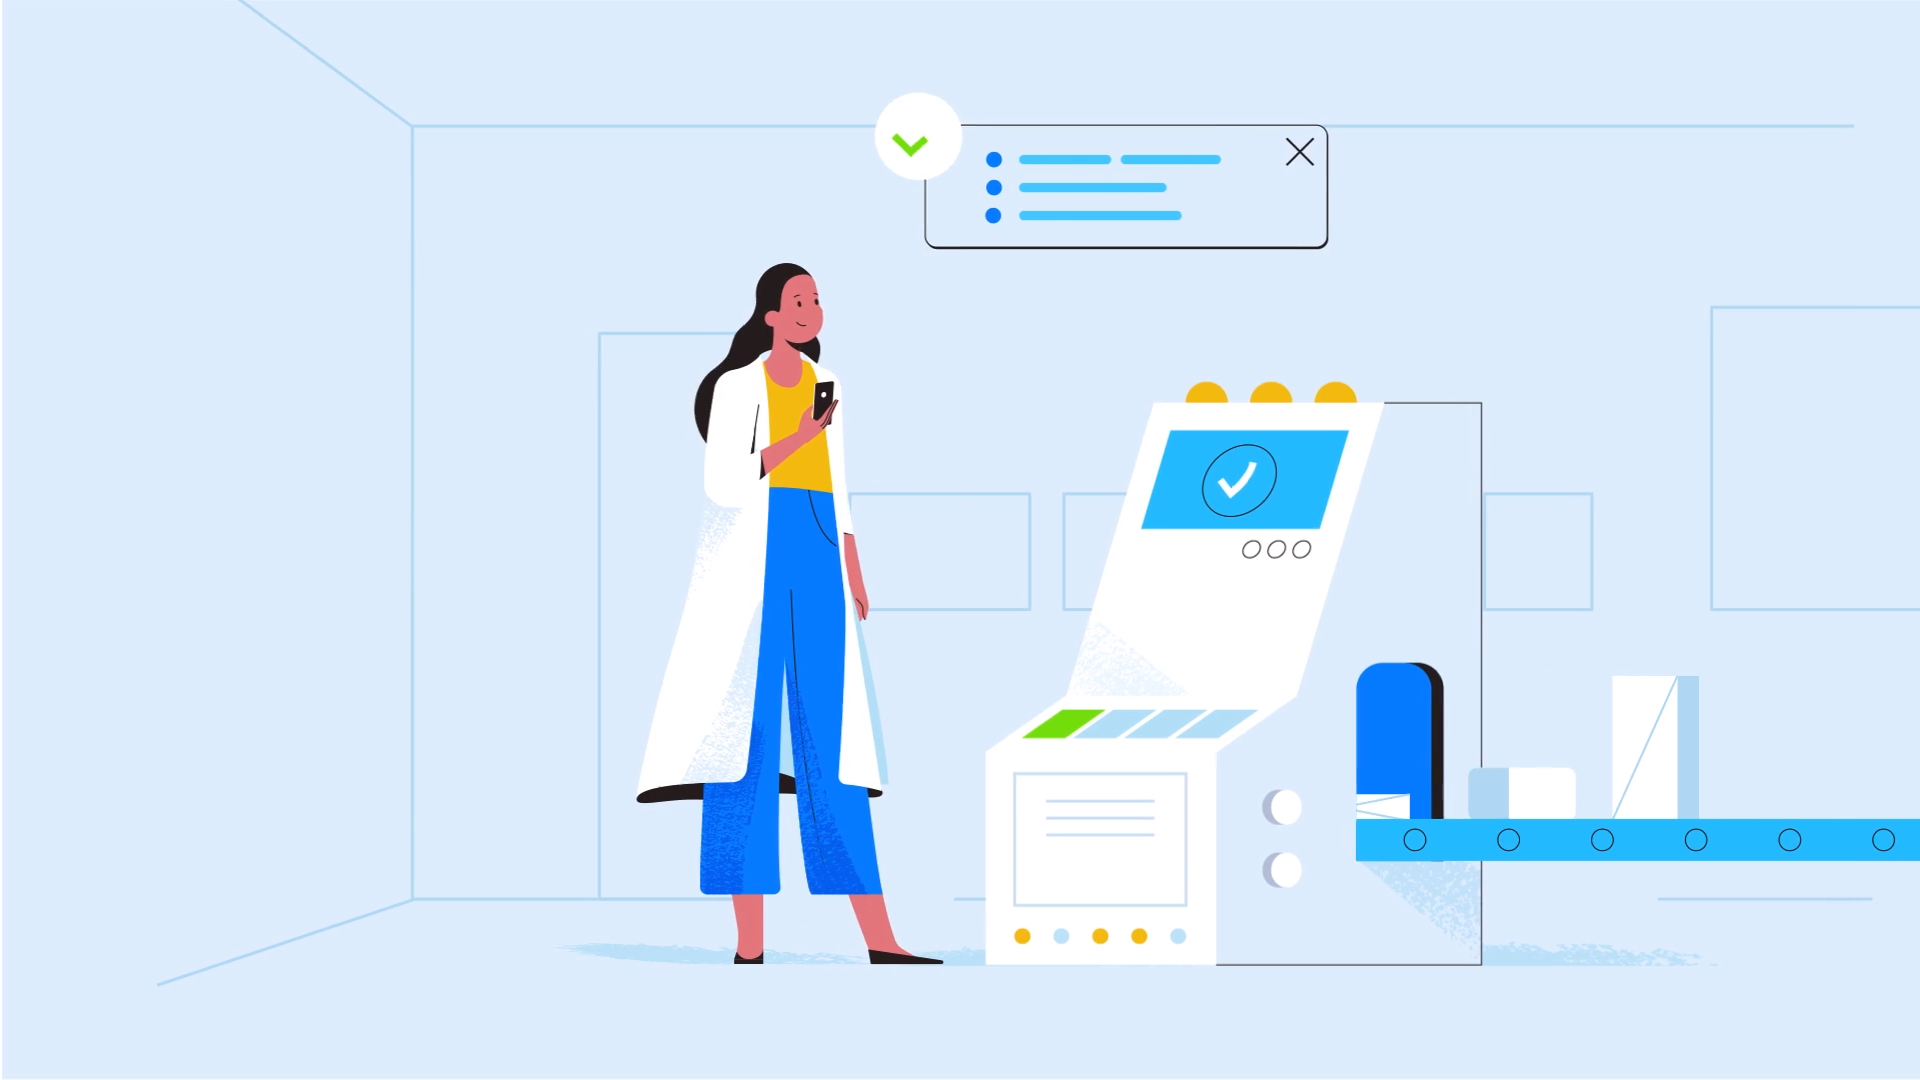 Illustration of woman in labcoat standing in front of a computer and converyor belt